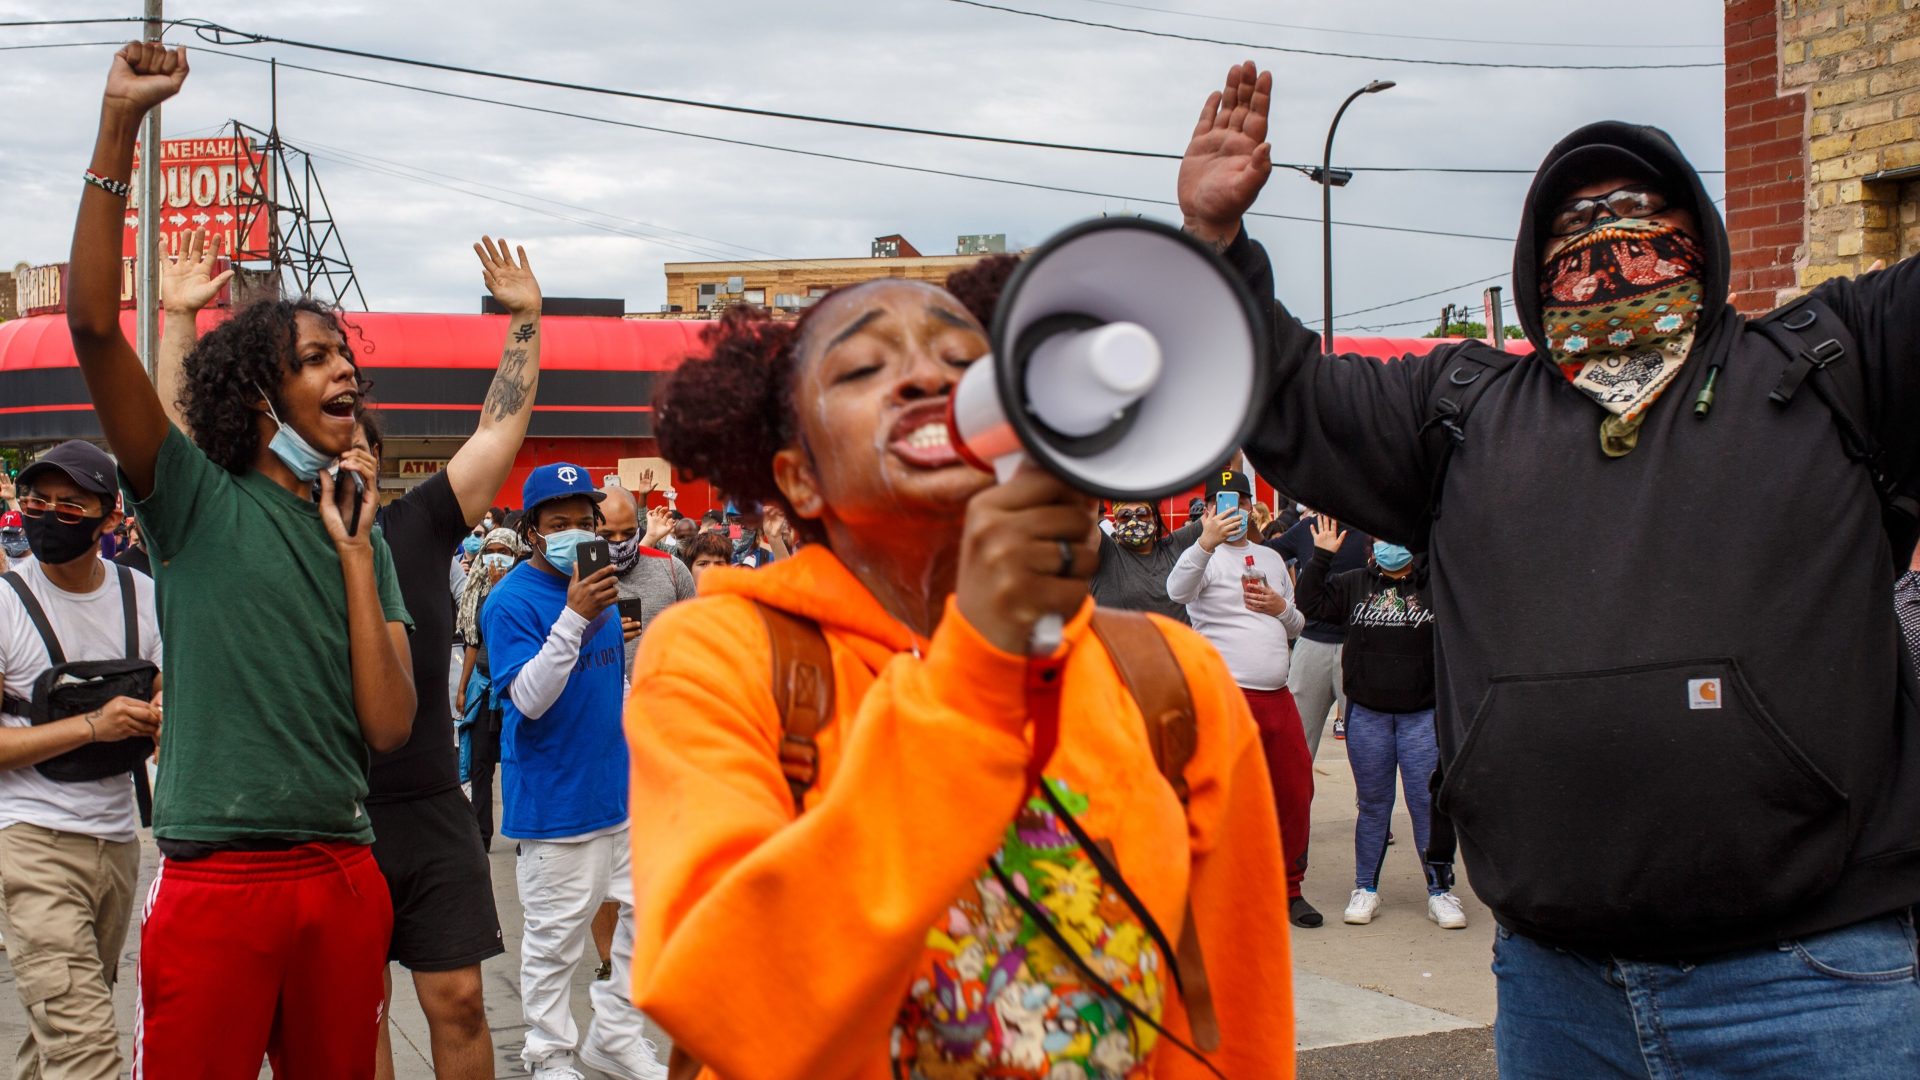 A young woman leads a group of protesters in chants outside the Minneapolis Police Third Precinct on Wednesday evening. The death of George Floyd, after video surfaced of an officer kneeling on his neck, has prompted protests nationwide -- nowhere more heated than in Minneapolis.